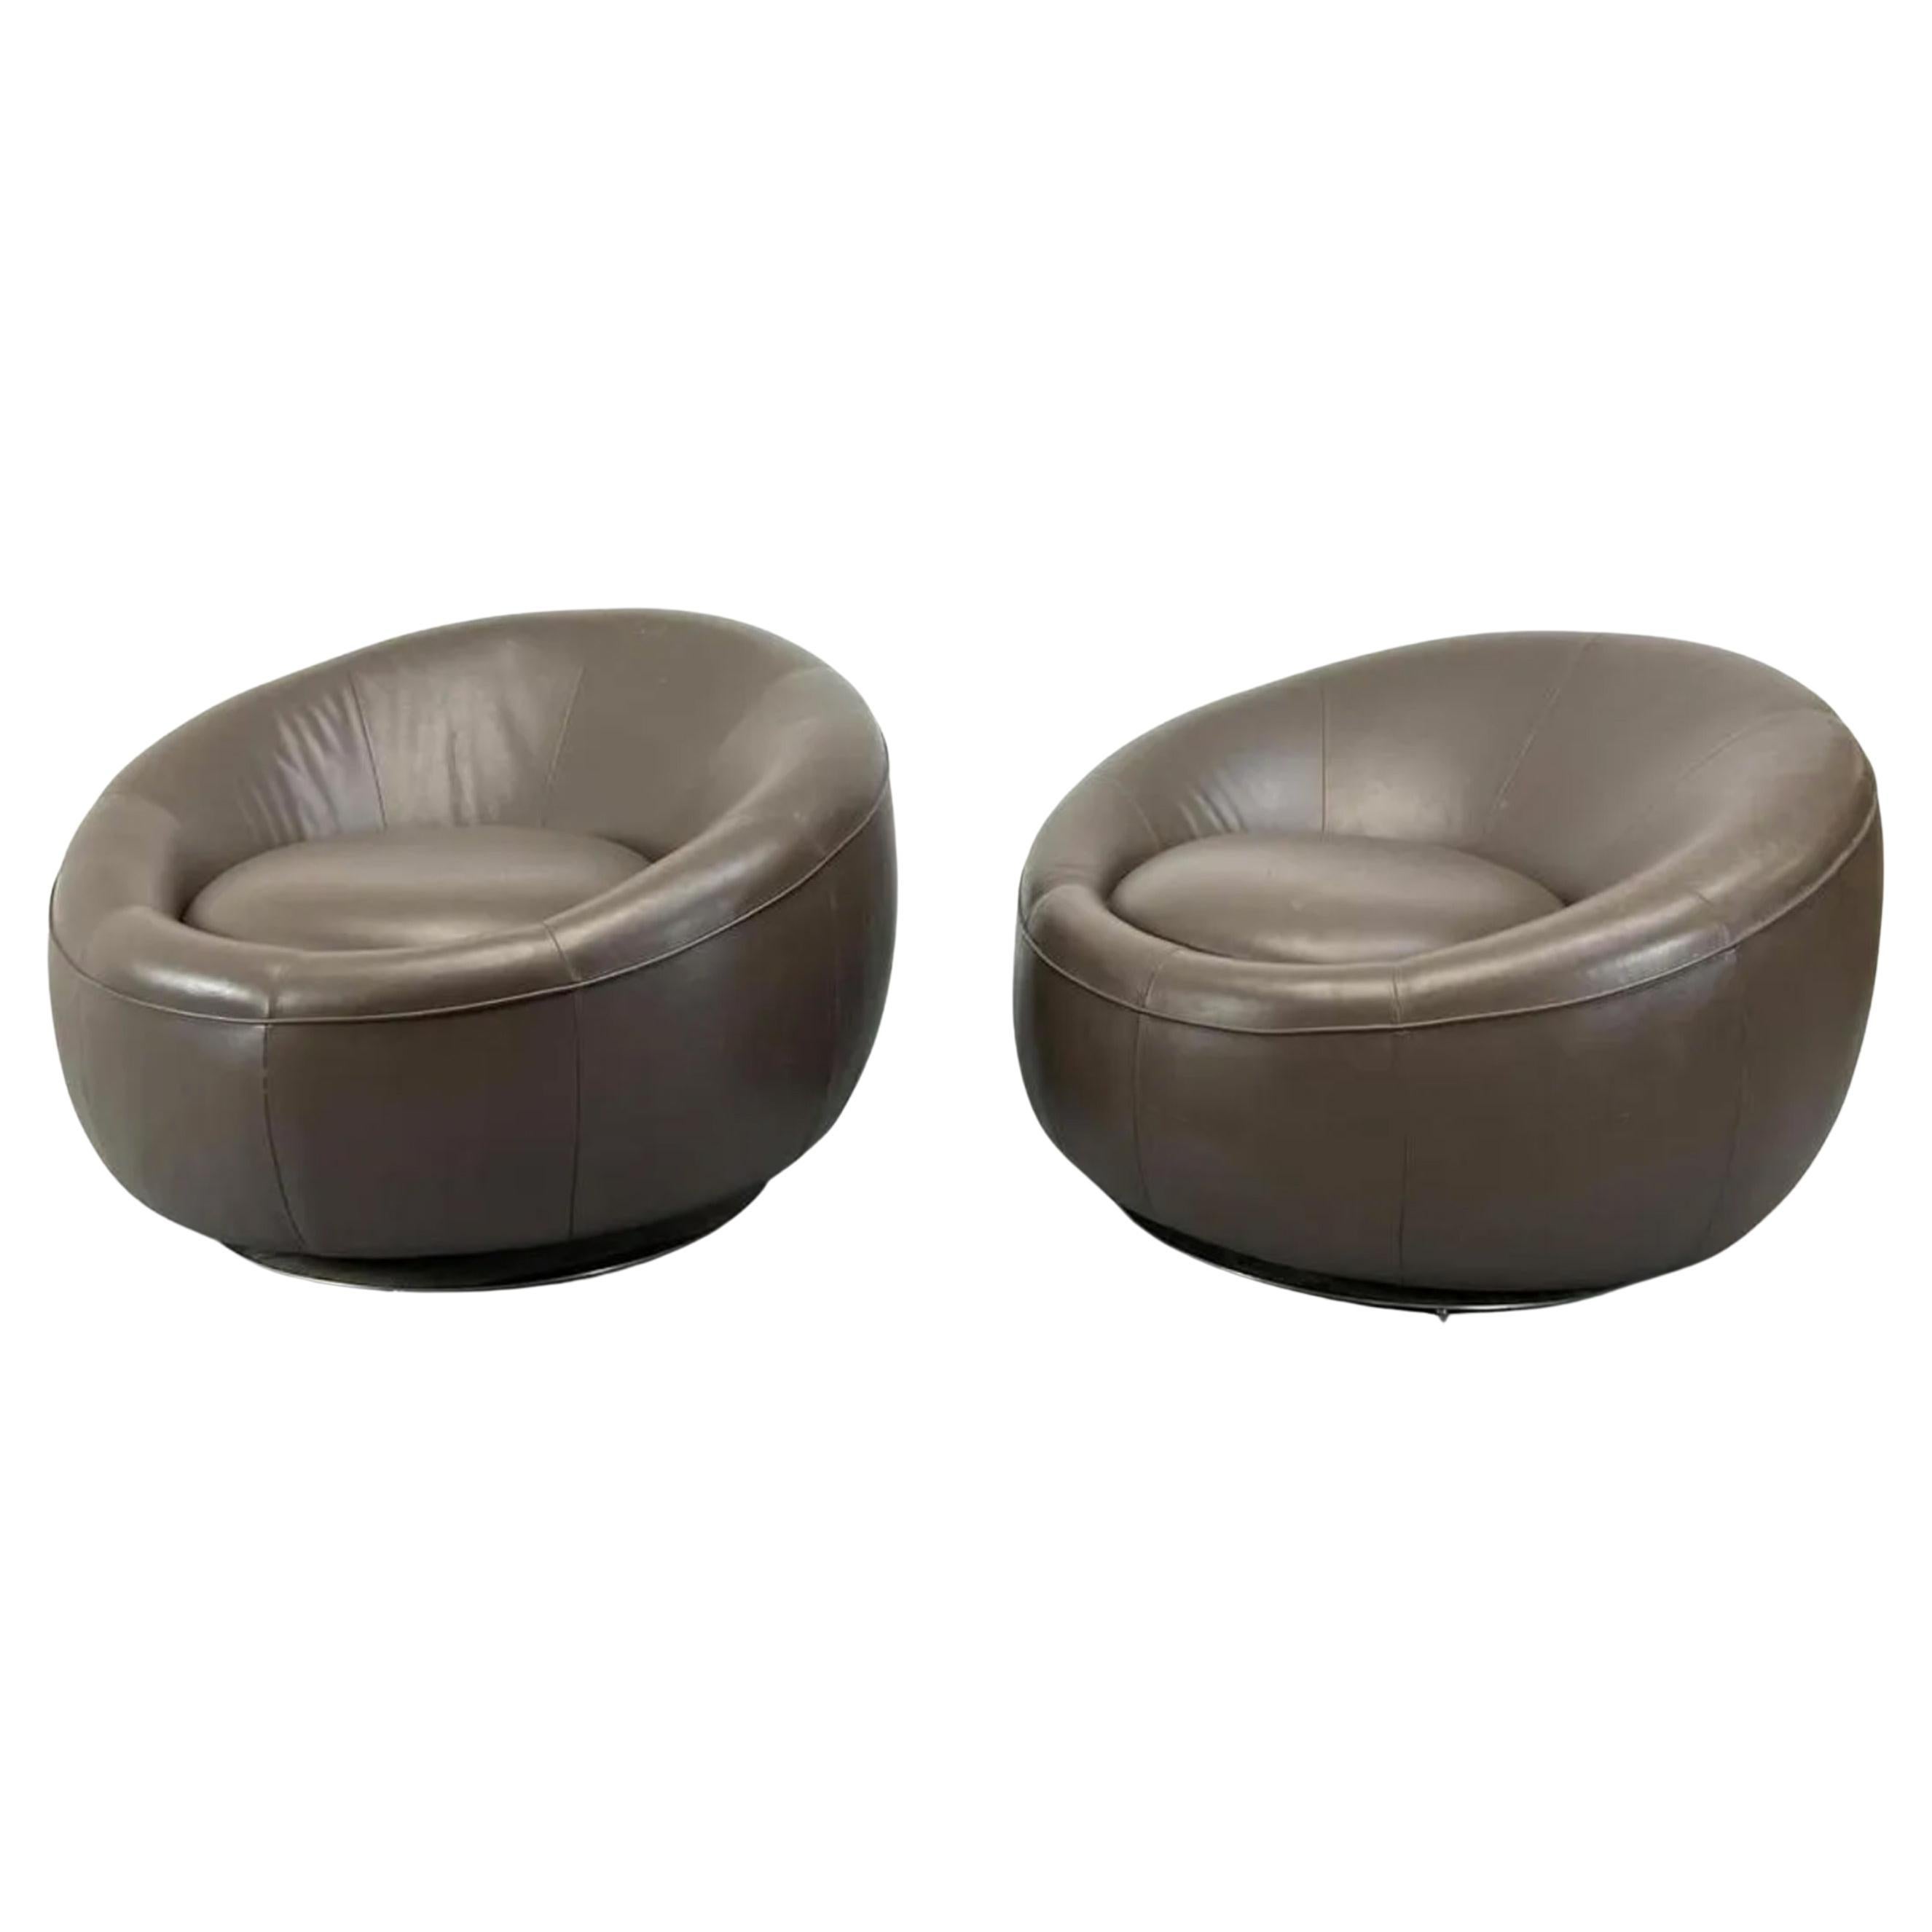 Pair of Modern Orb Pod Biomorphic Brown Leather lounge chairs on Swivel bases